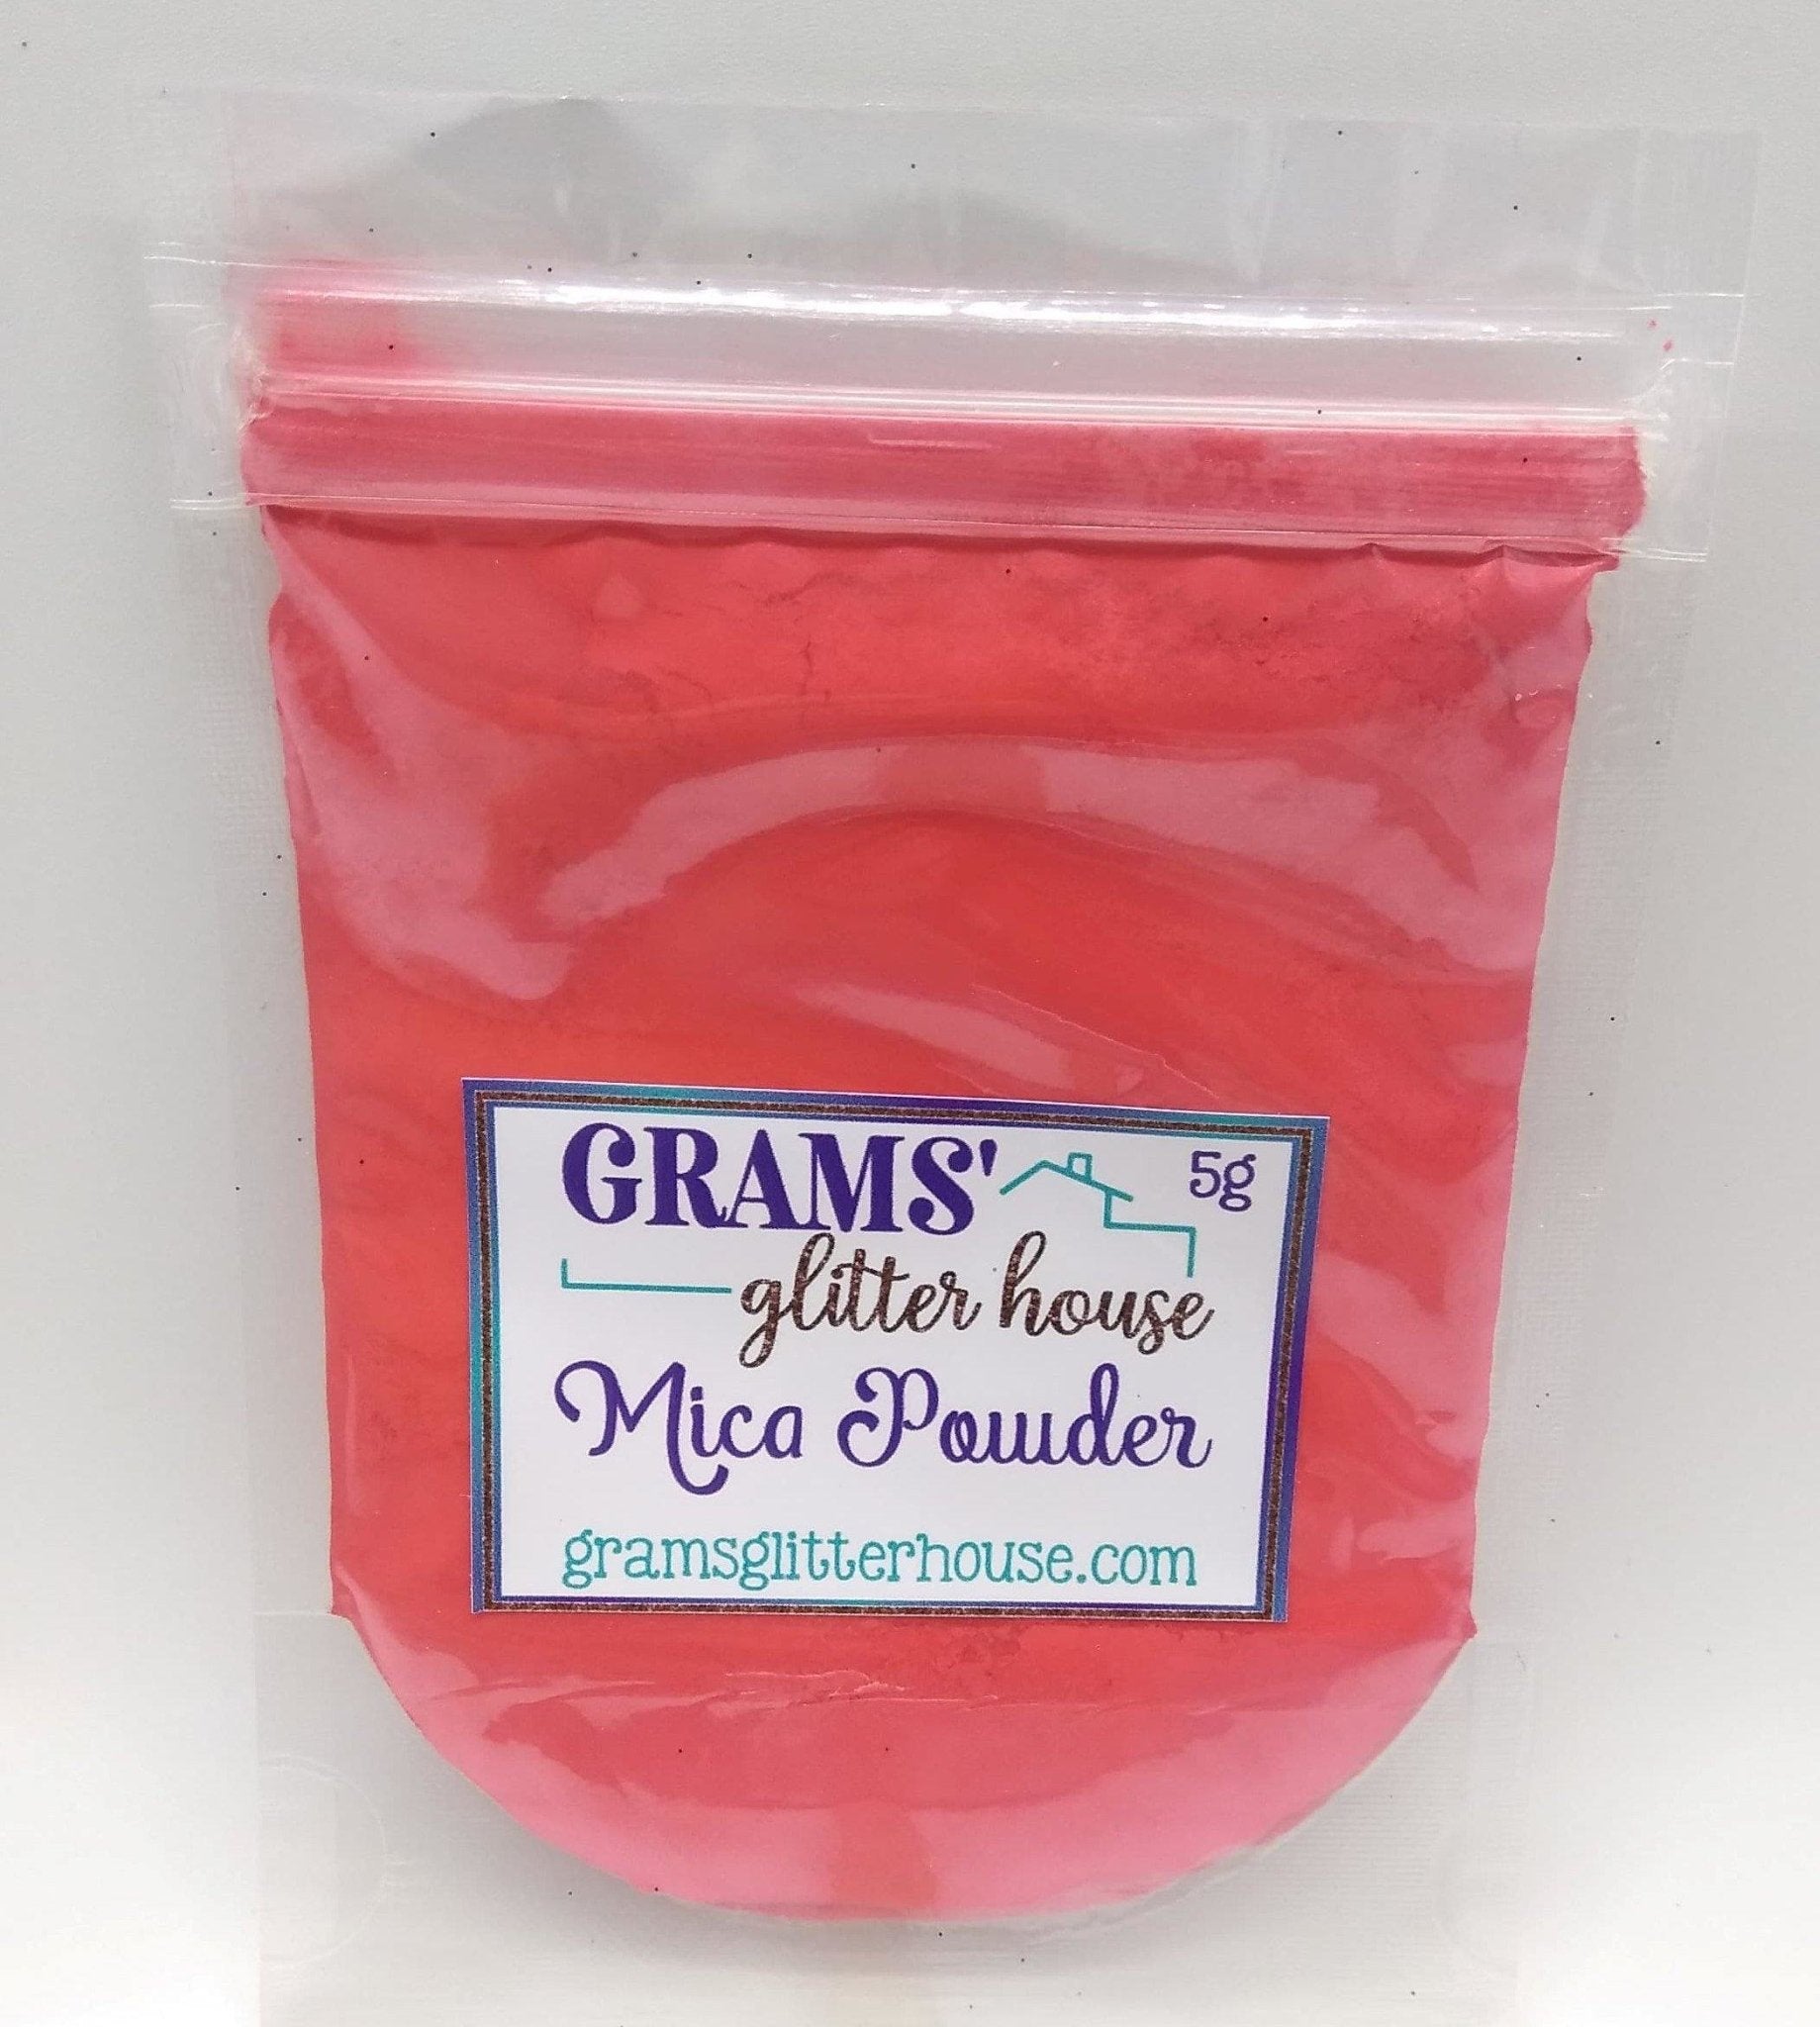 Hot Pink 53 Grams' Glitter House Hot Pink Mica Powder Pigment